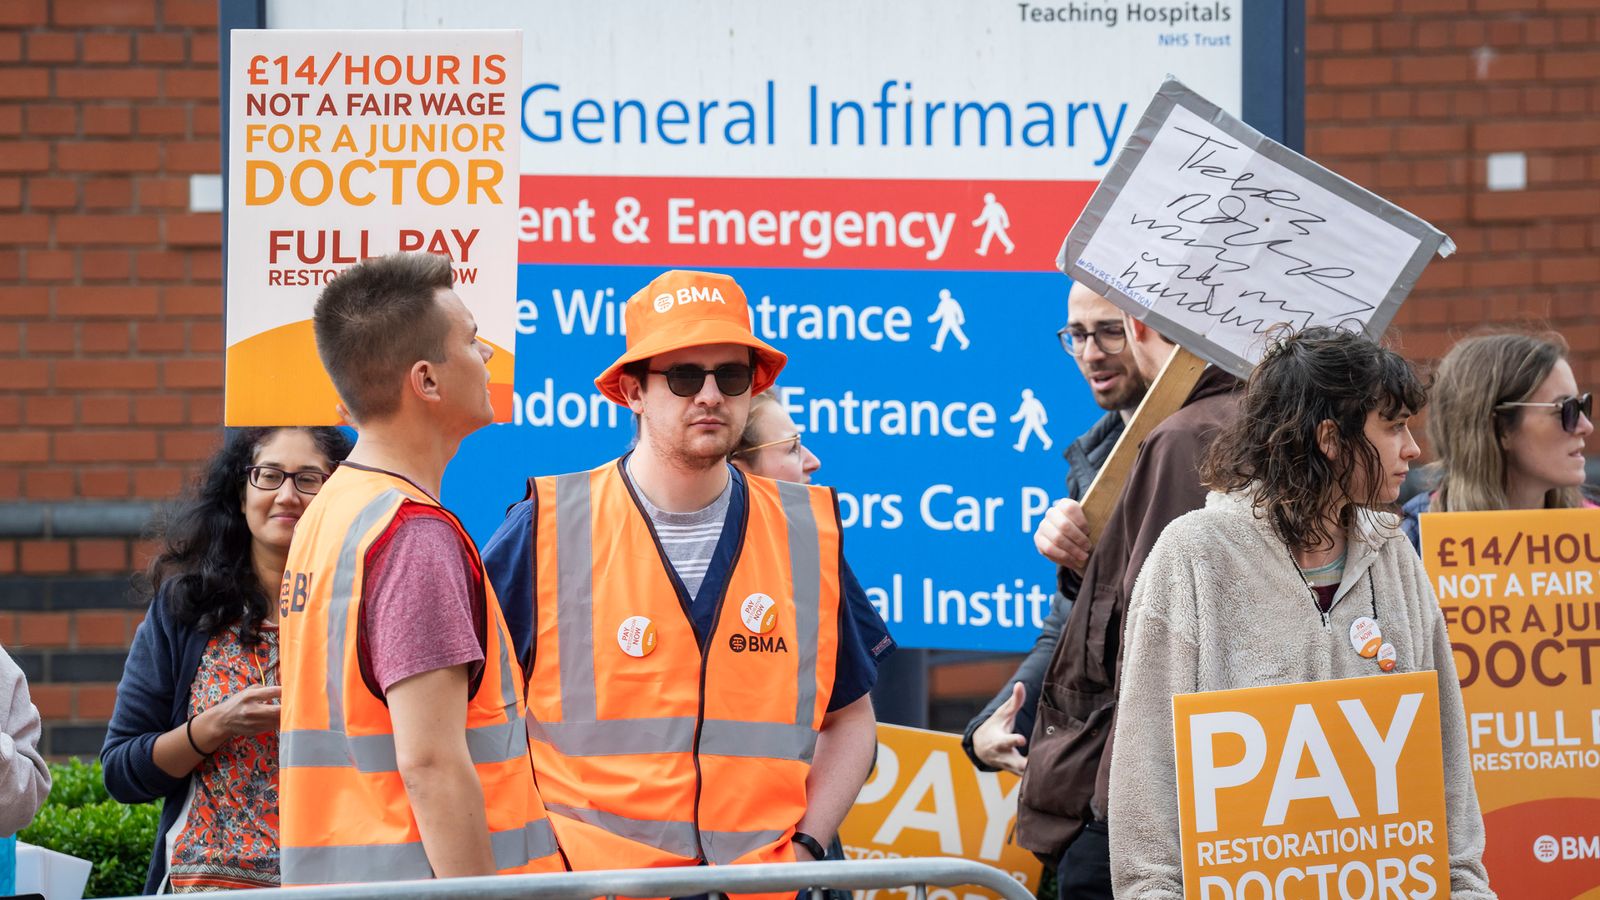 NHS strikes: Almost half of public blame government for industrial action by doctors, poll finds